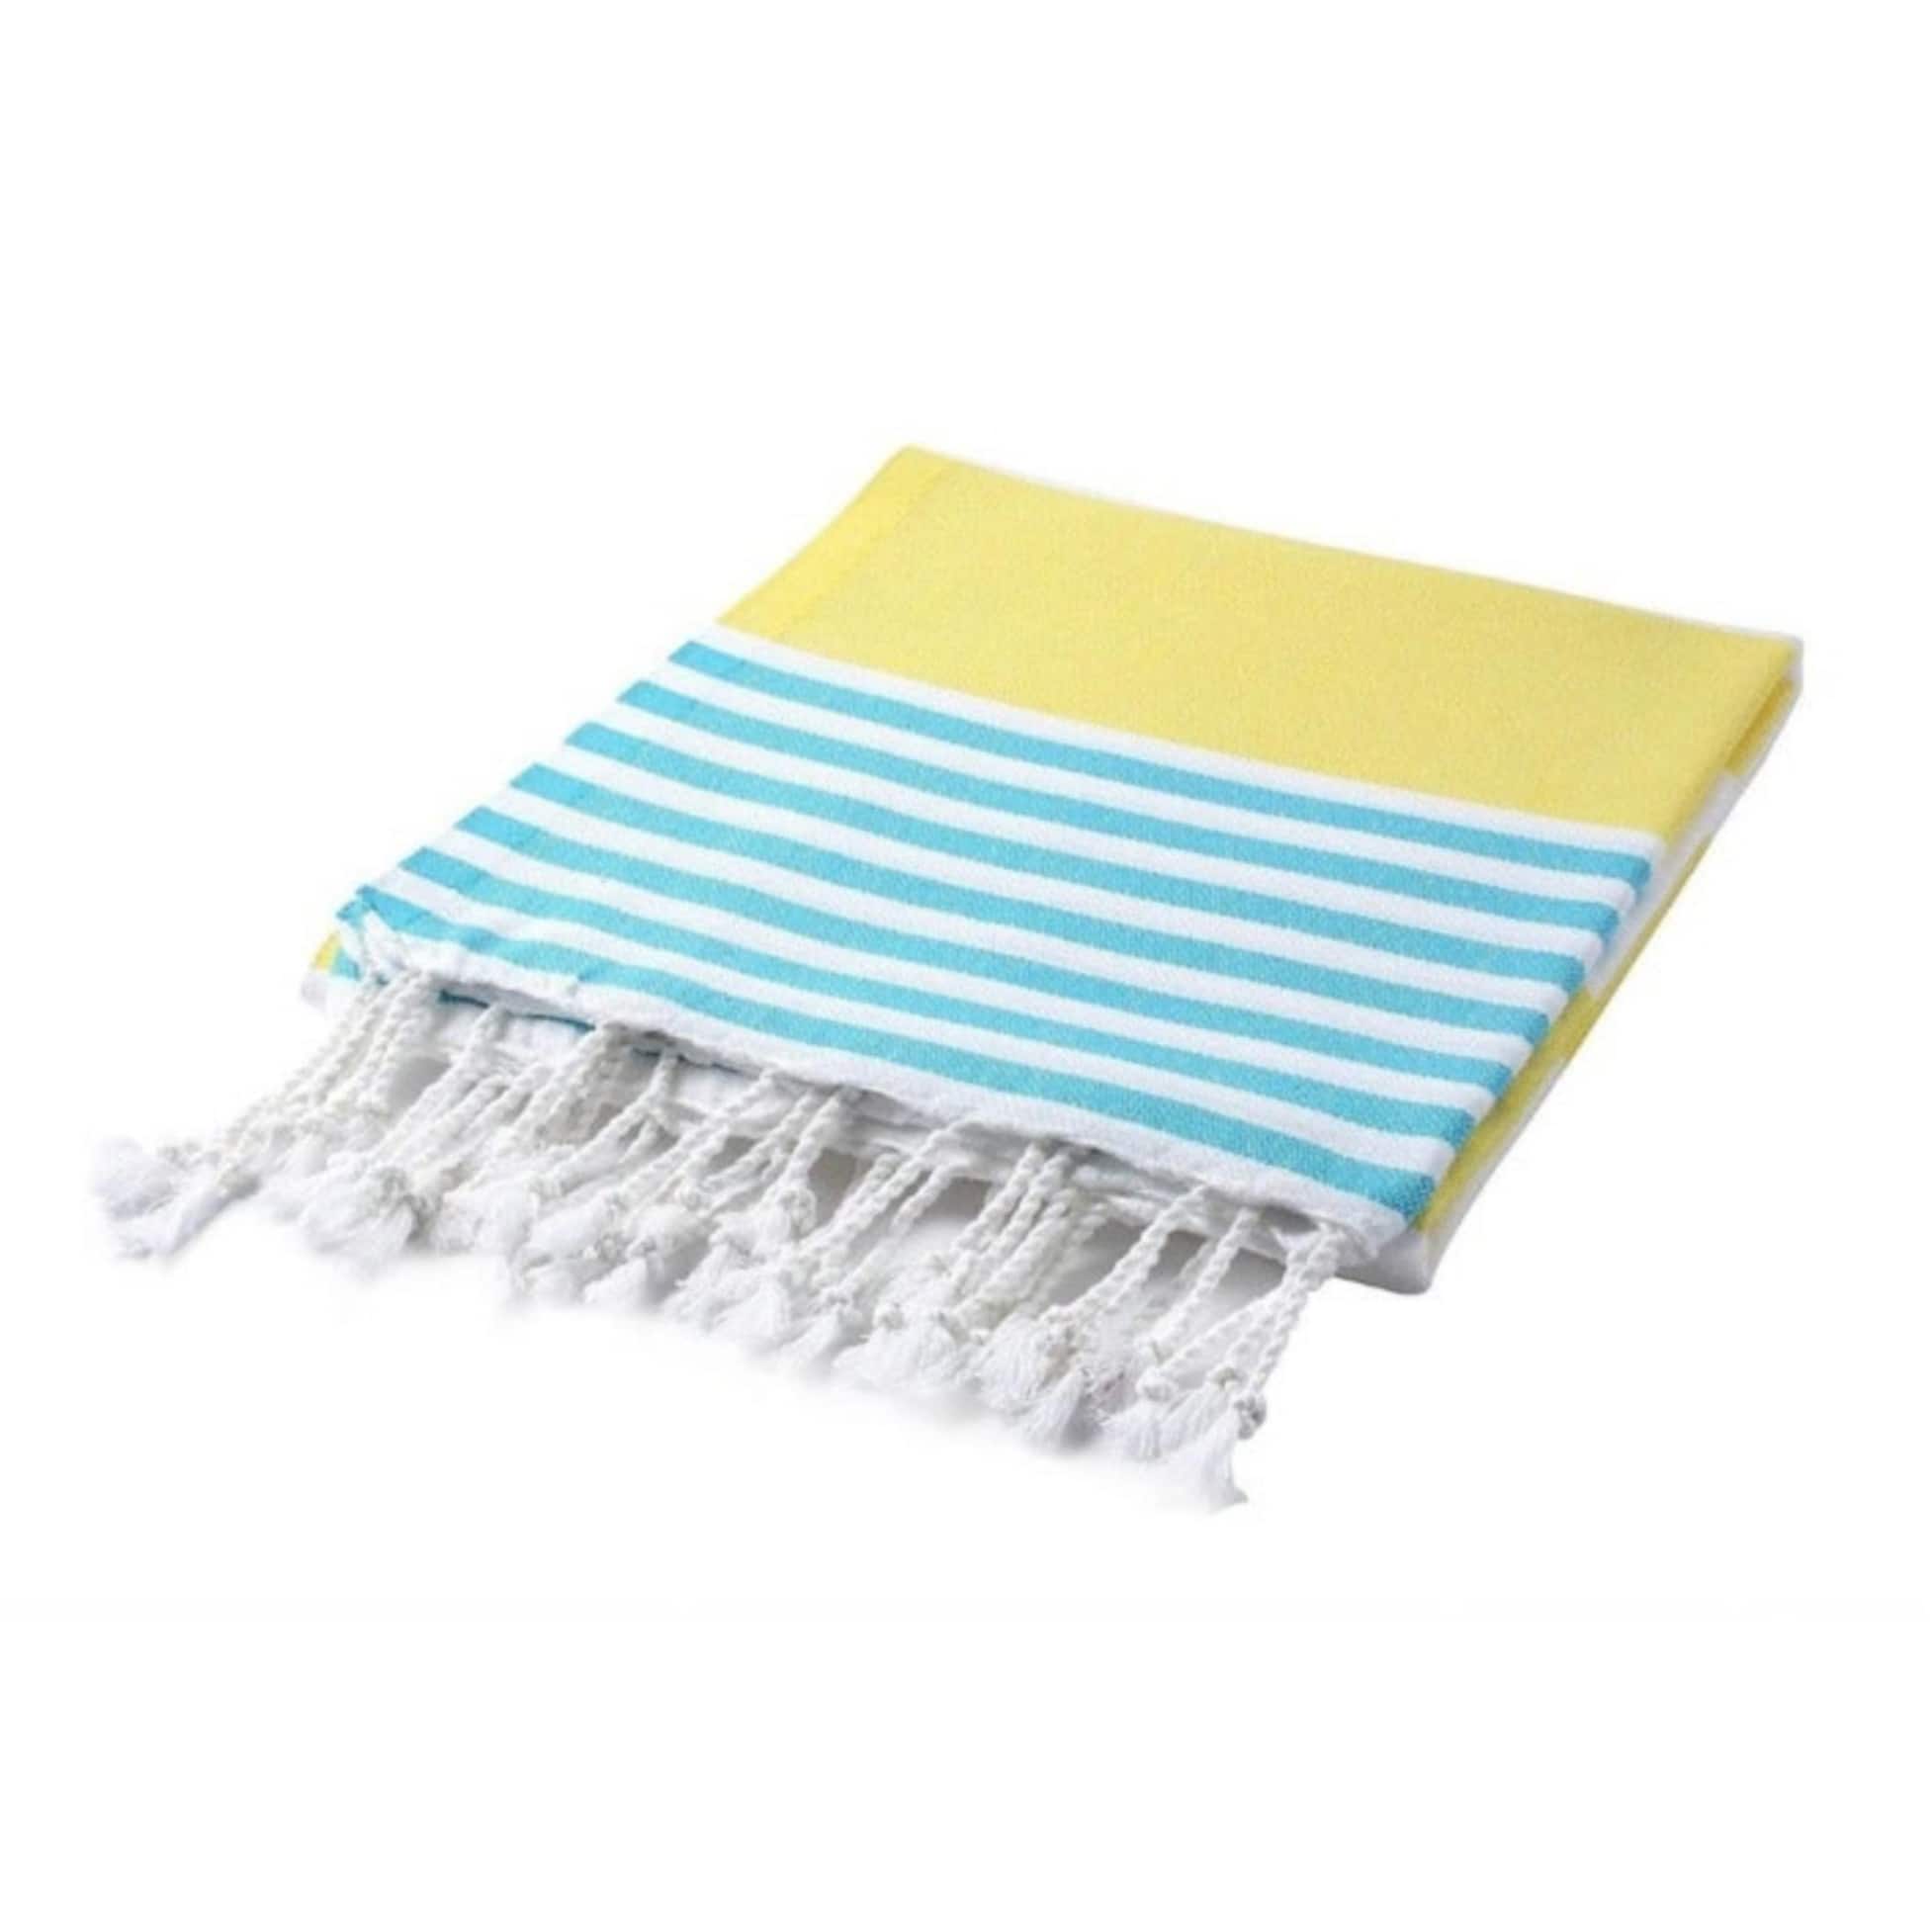 Yellow Turquoise Beach Towel - Striped Authentic 100% Turkish Cotton ...